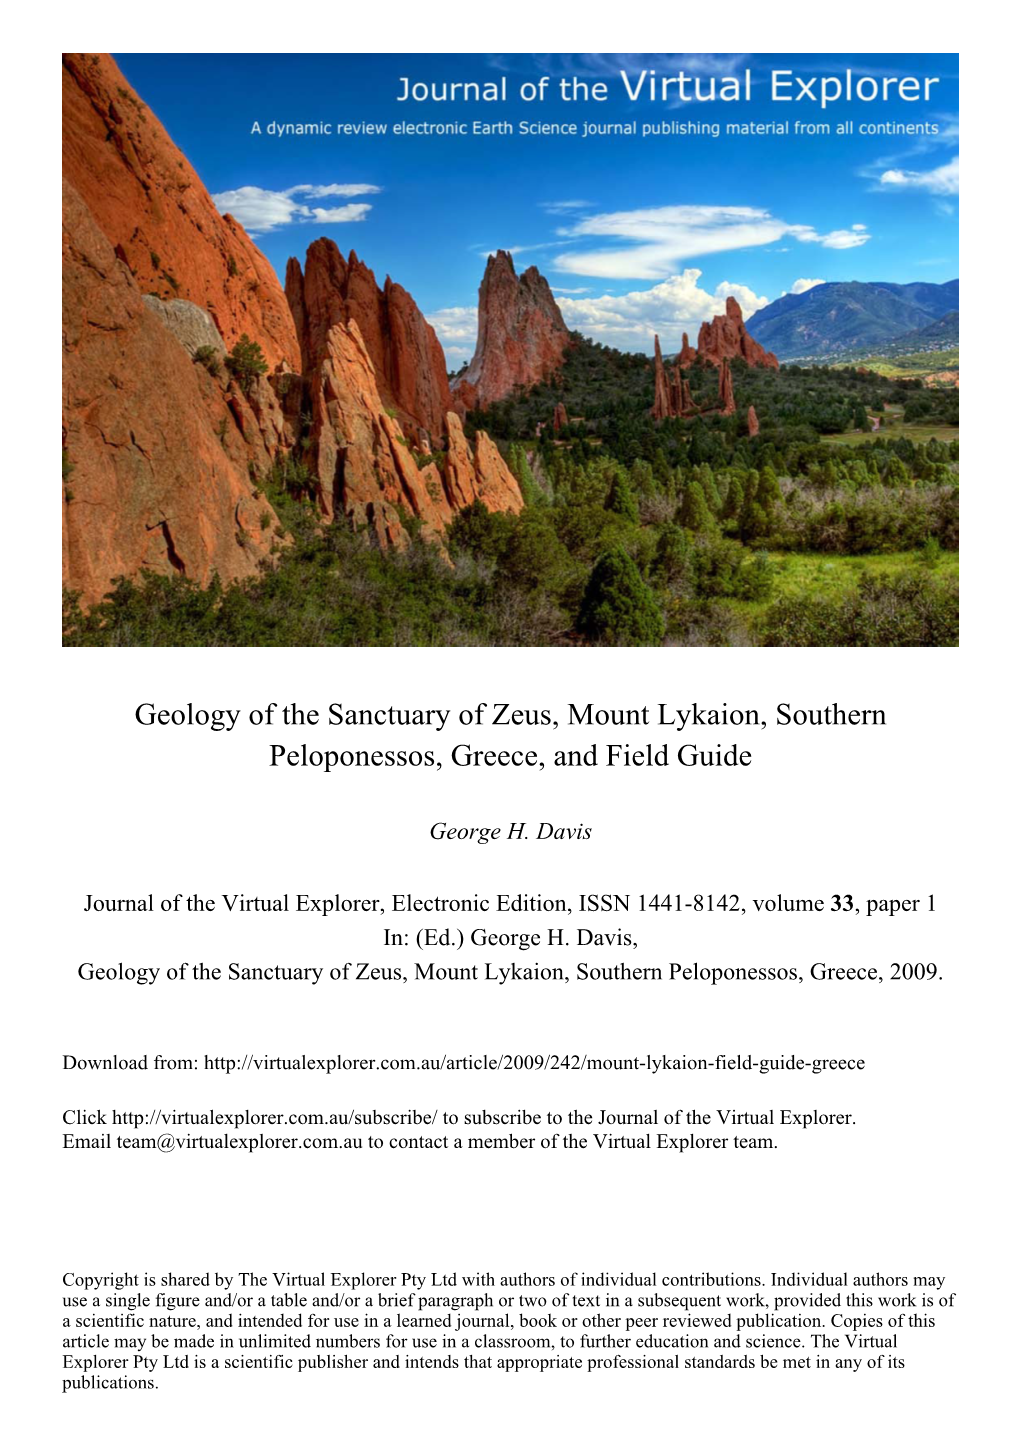 Geology of the Sanctuary of Zeus, Mount Lykaion, Southern Peloponessos, Greece, and Field Guide